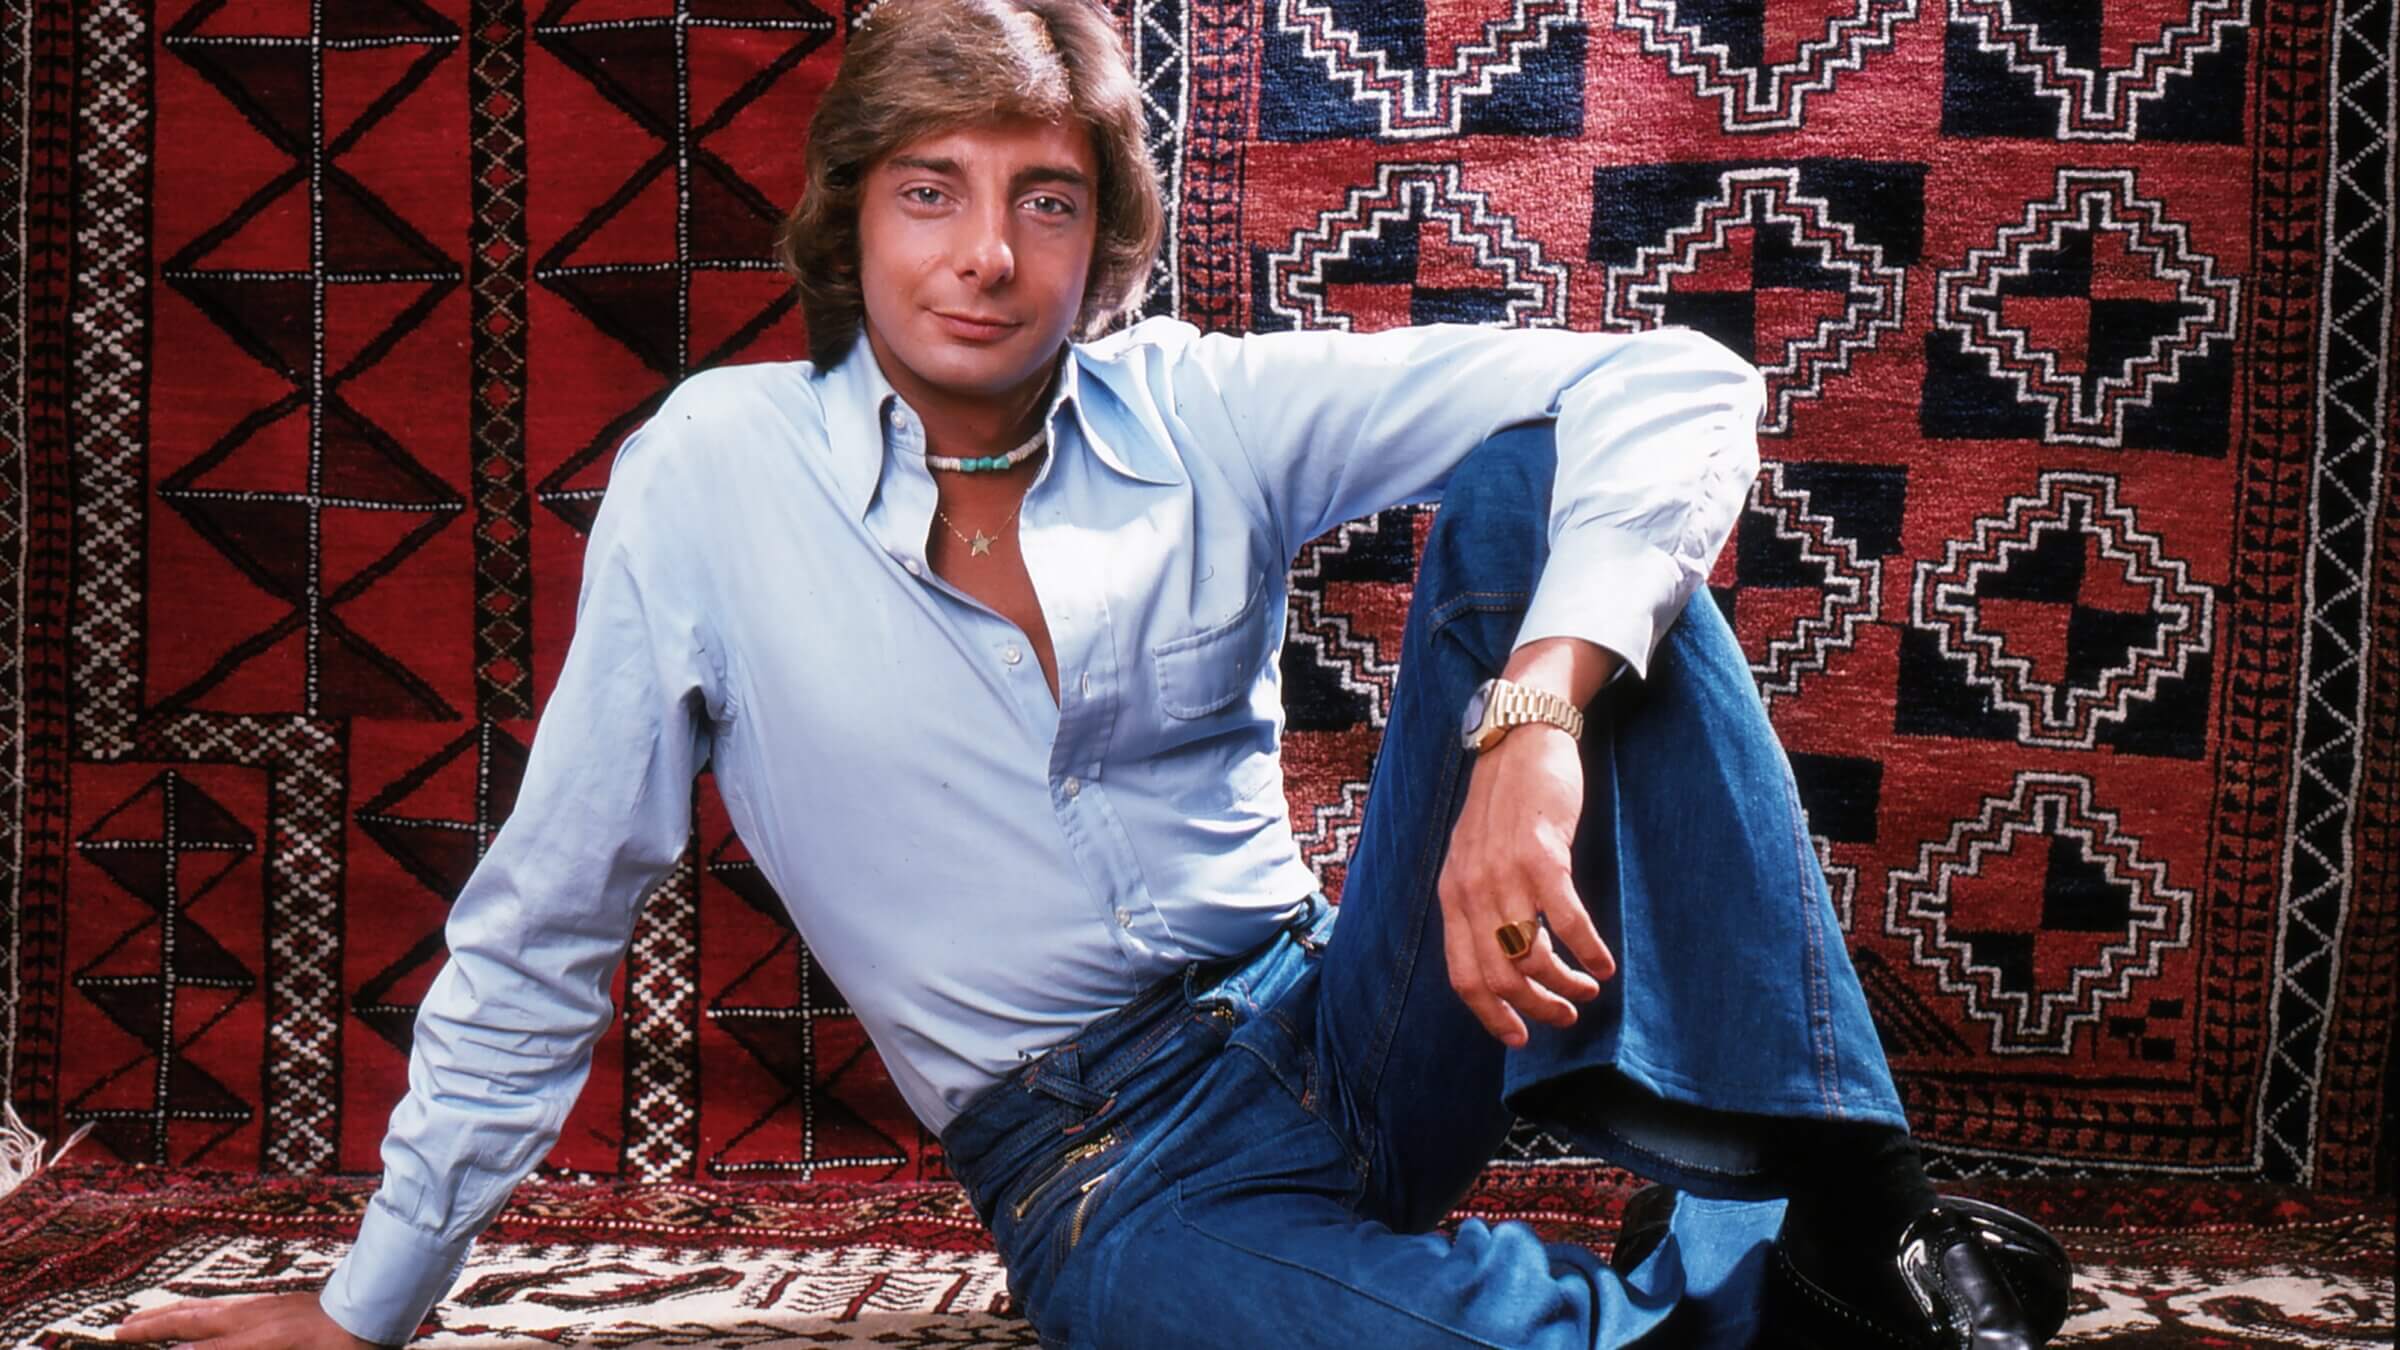 Barry Manilow in New York, circa 1976.